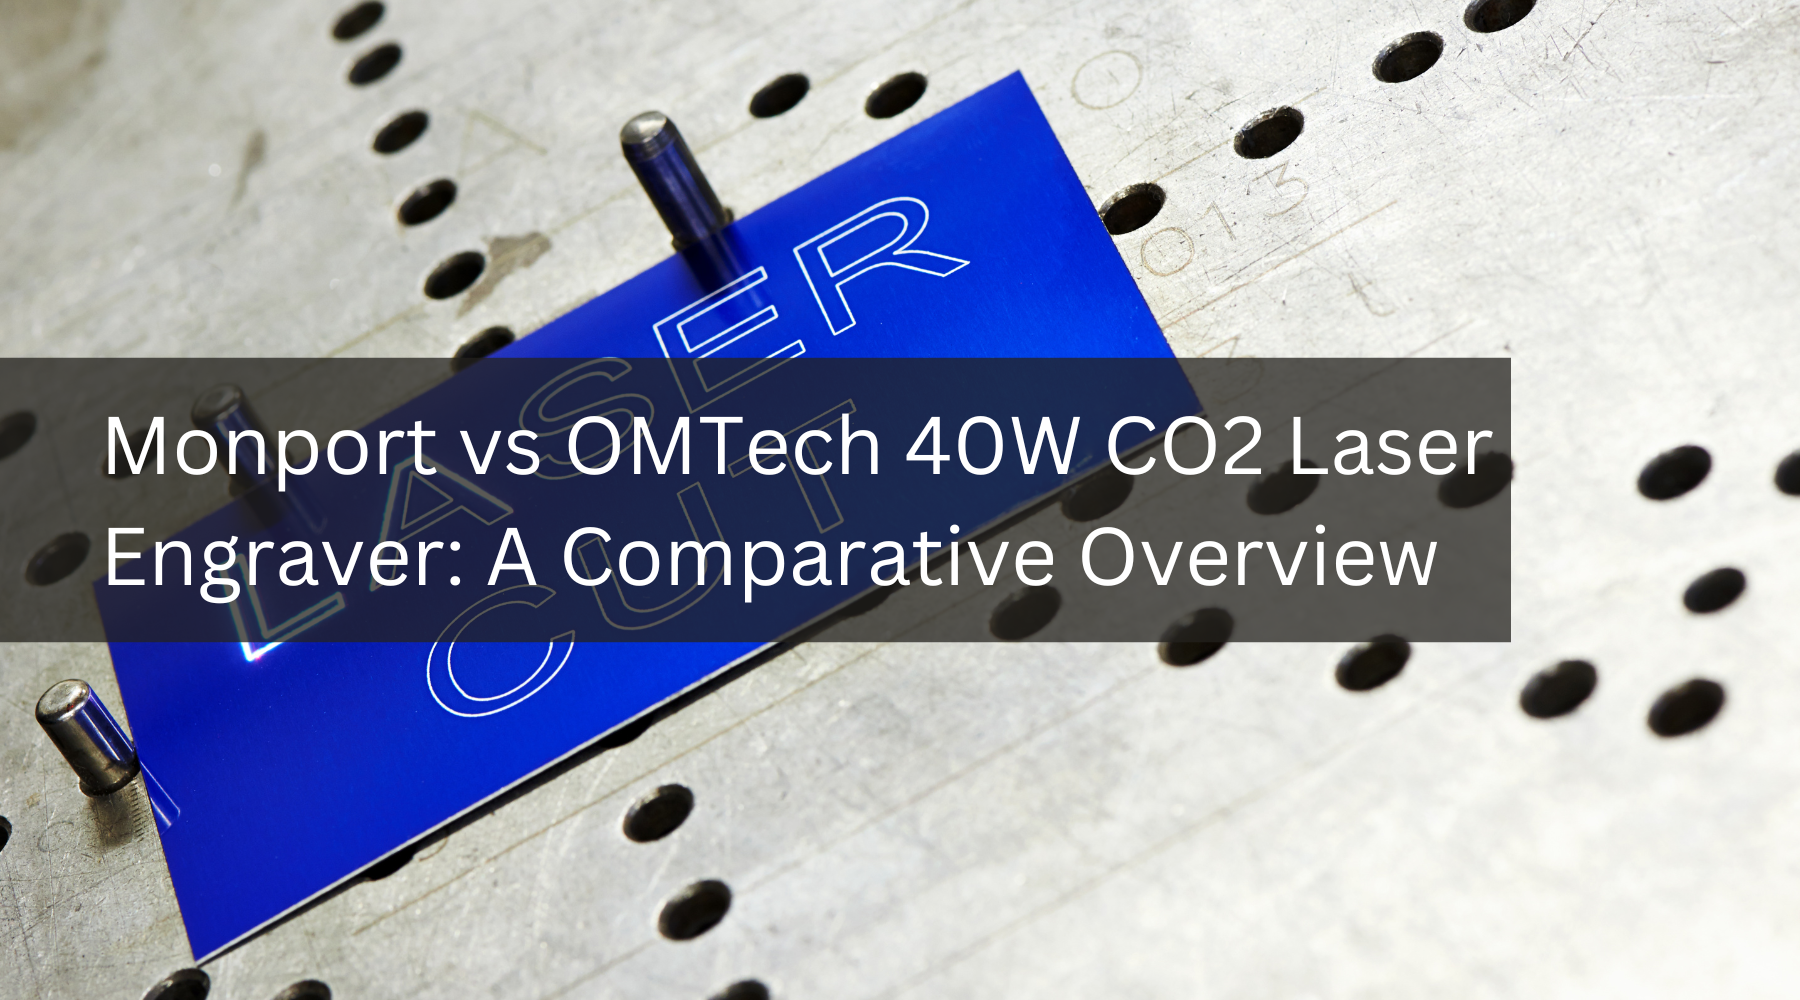 Monport vs OMTech 40W CO2 Laser Engraver: A Comparative Overview